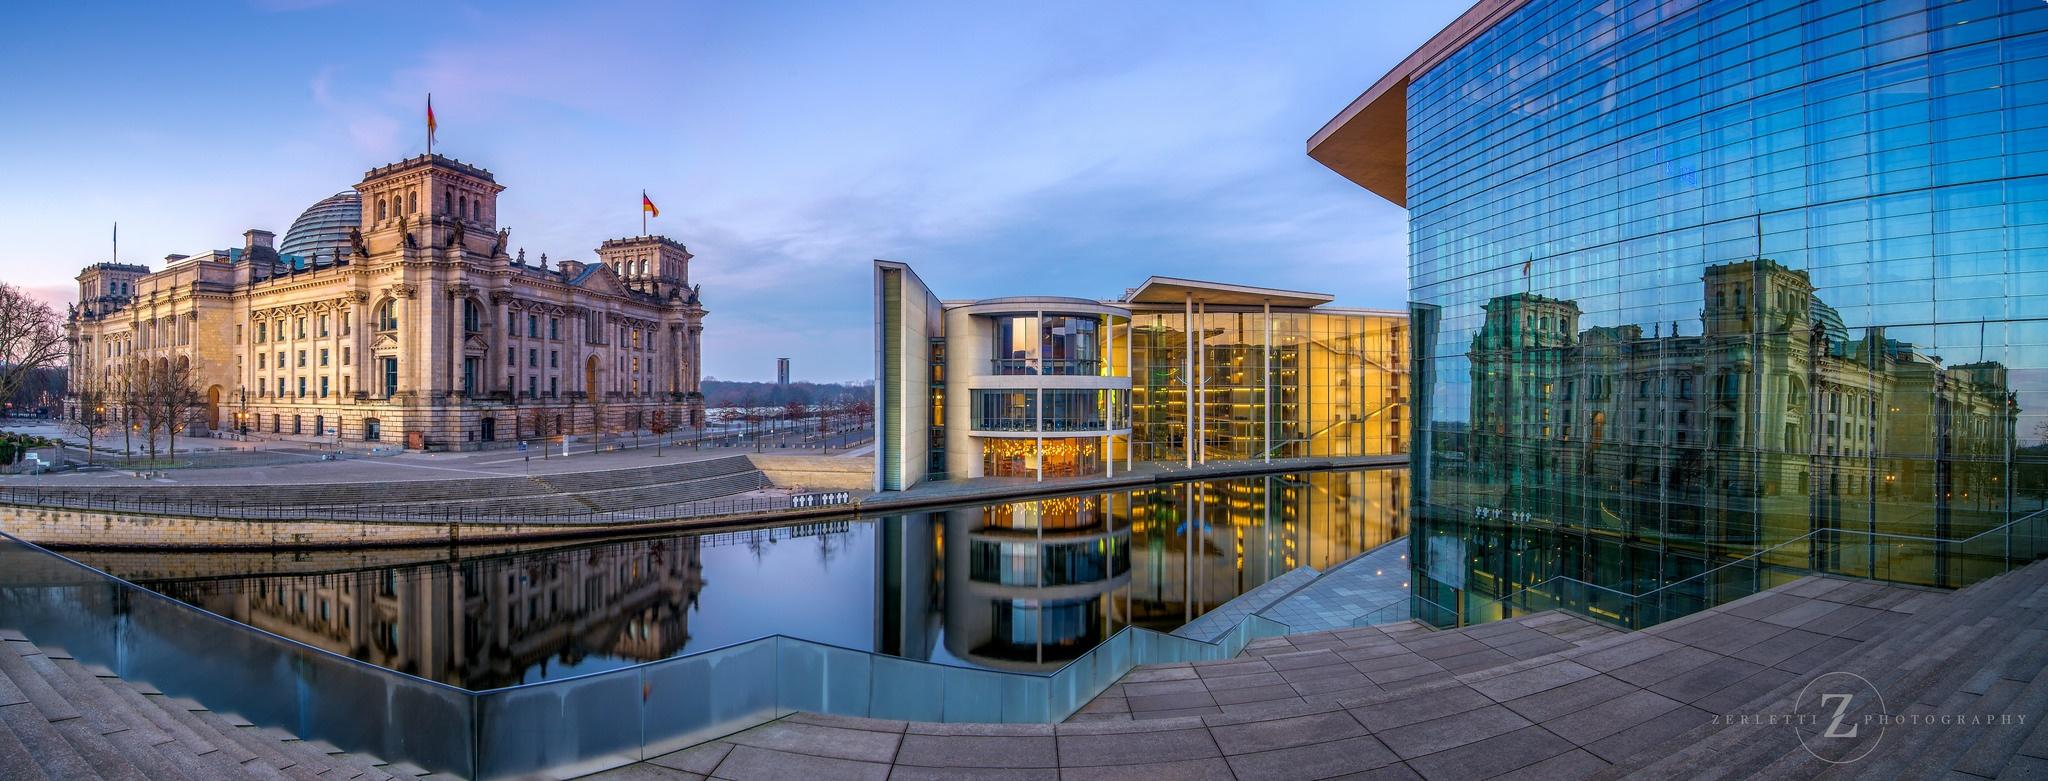 Reichstag Berlin - Panorama